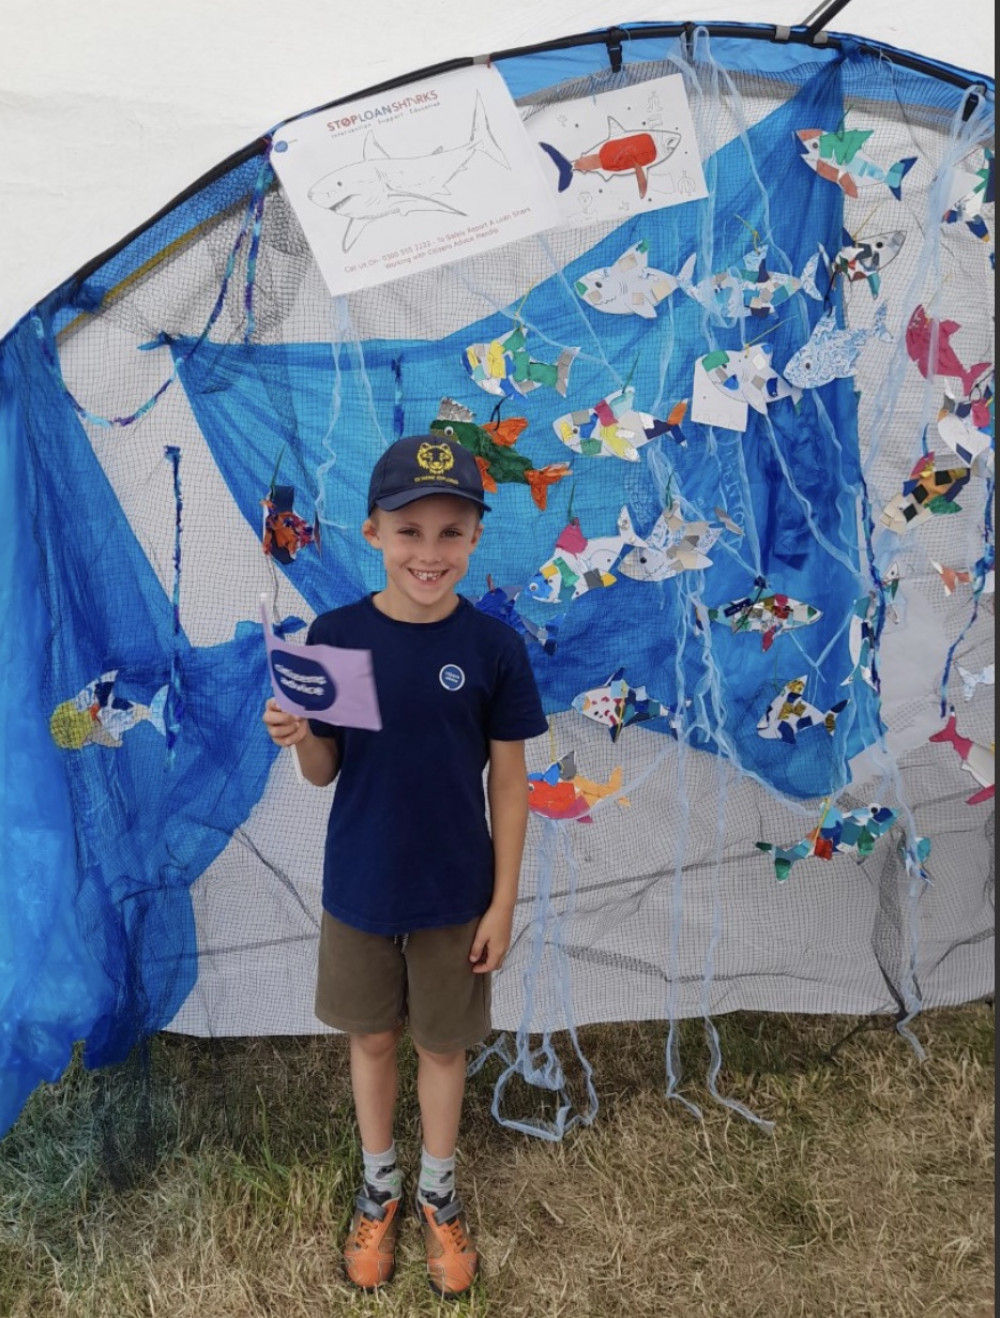 One of the young artists in front of the sharks the children created 